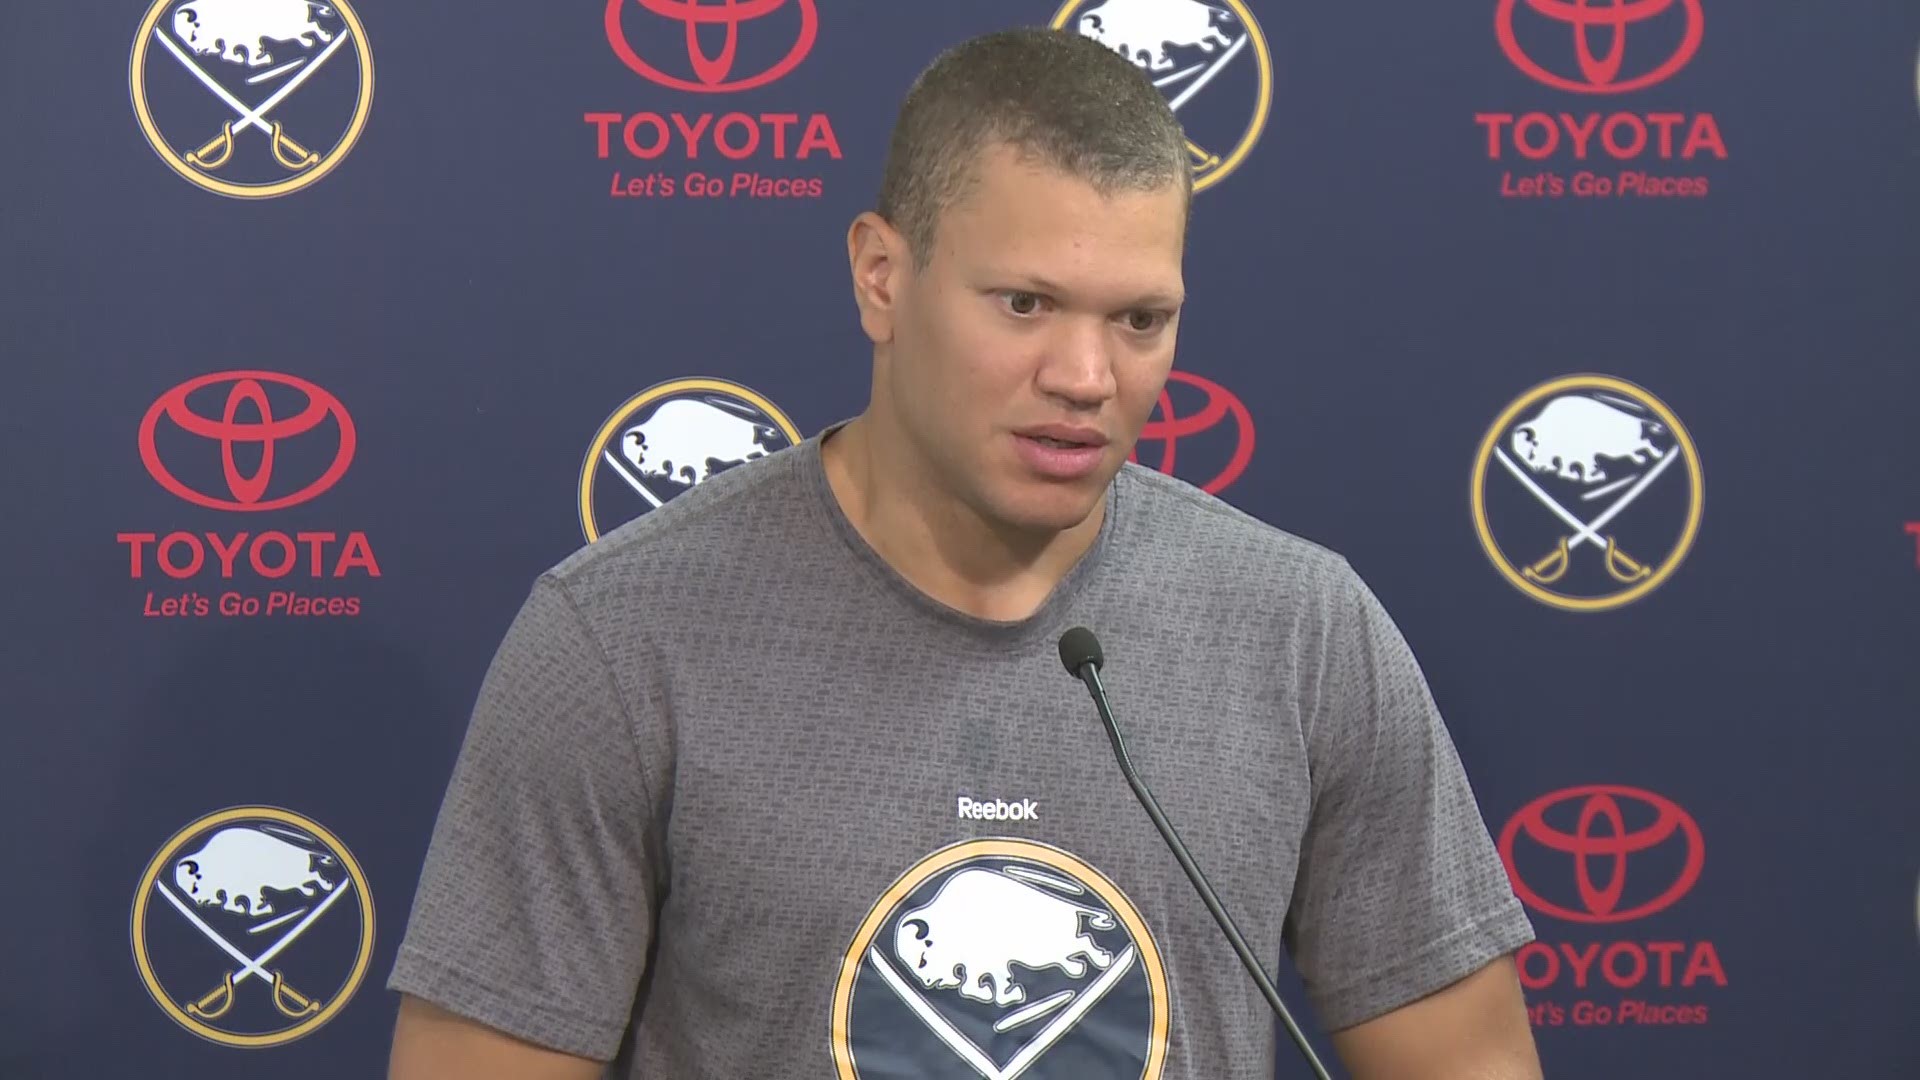 Kyle Okposo is "100 percent" after health scare and hospitalization last season